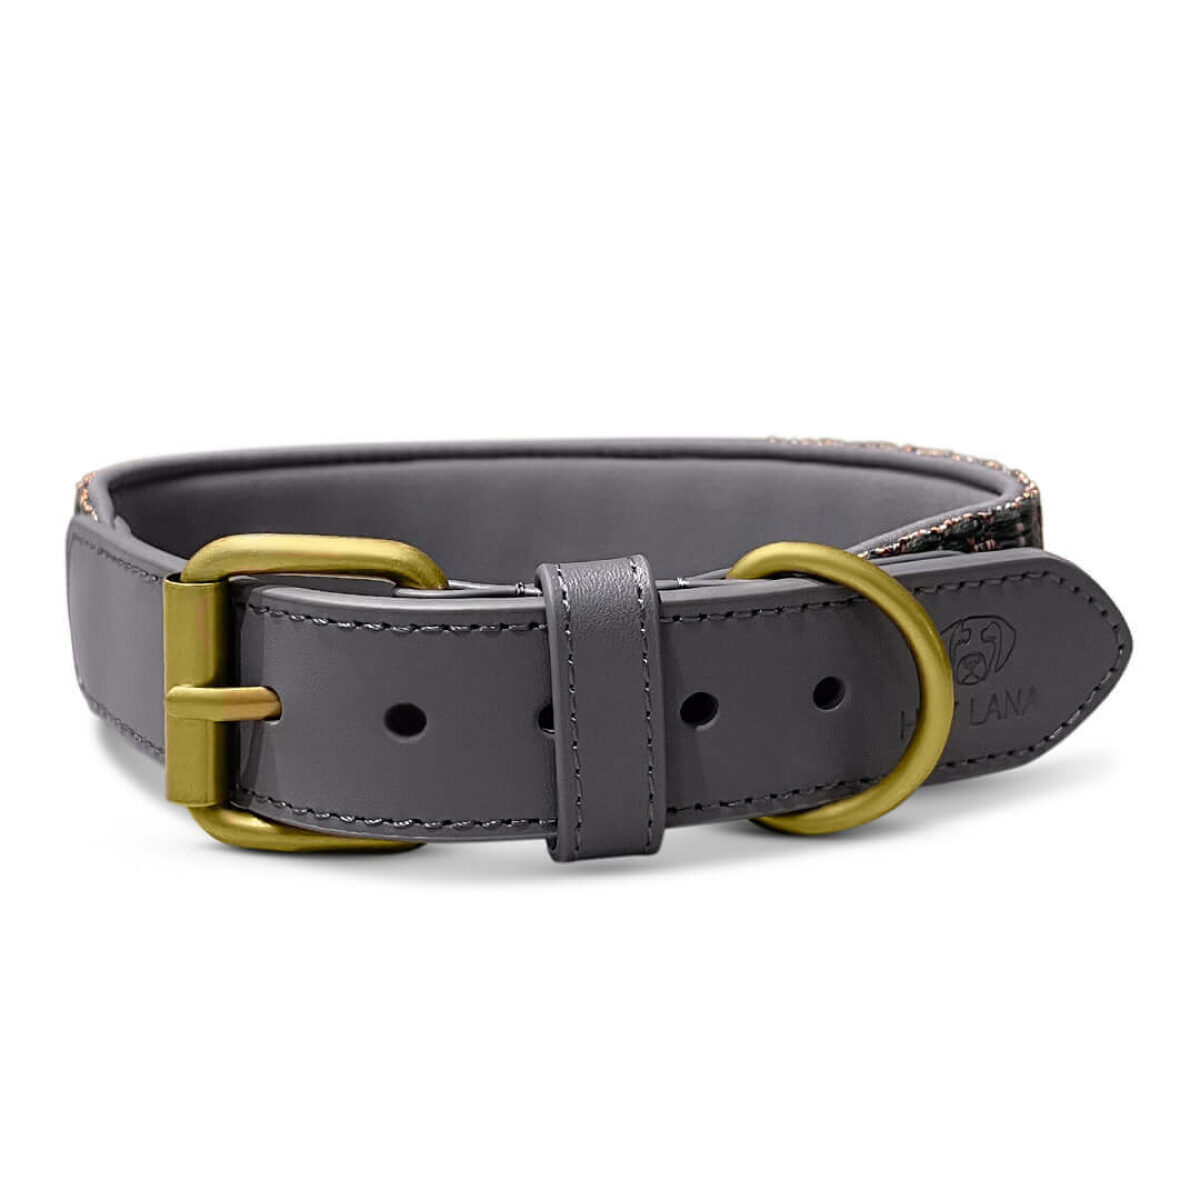 Tres Chic collection premium dog collar padded in blue/grey front